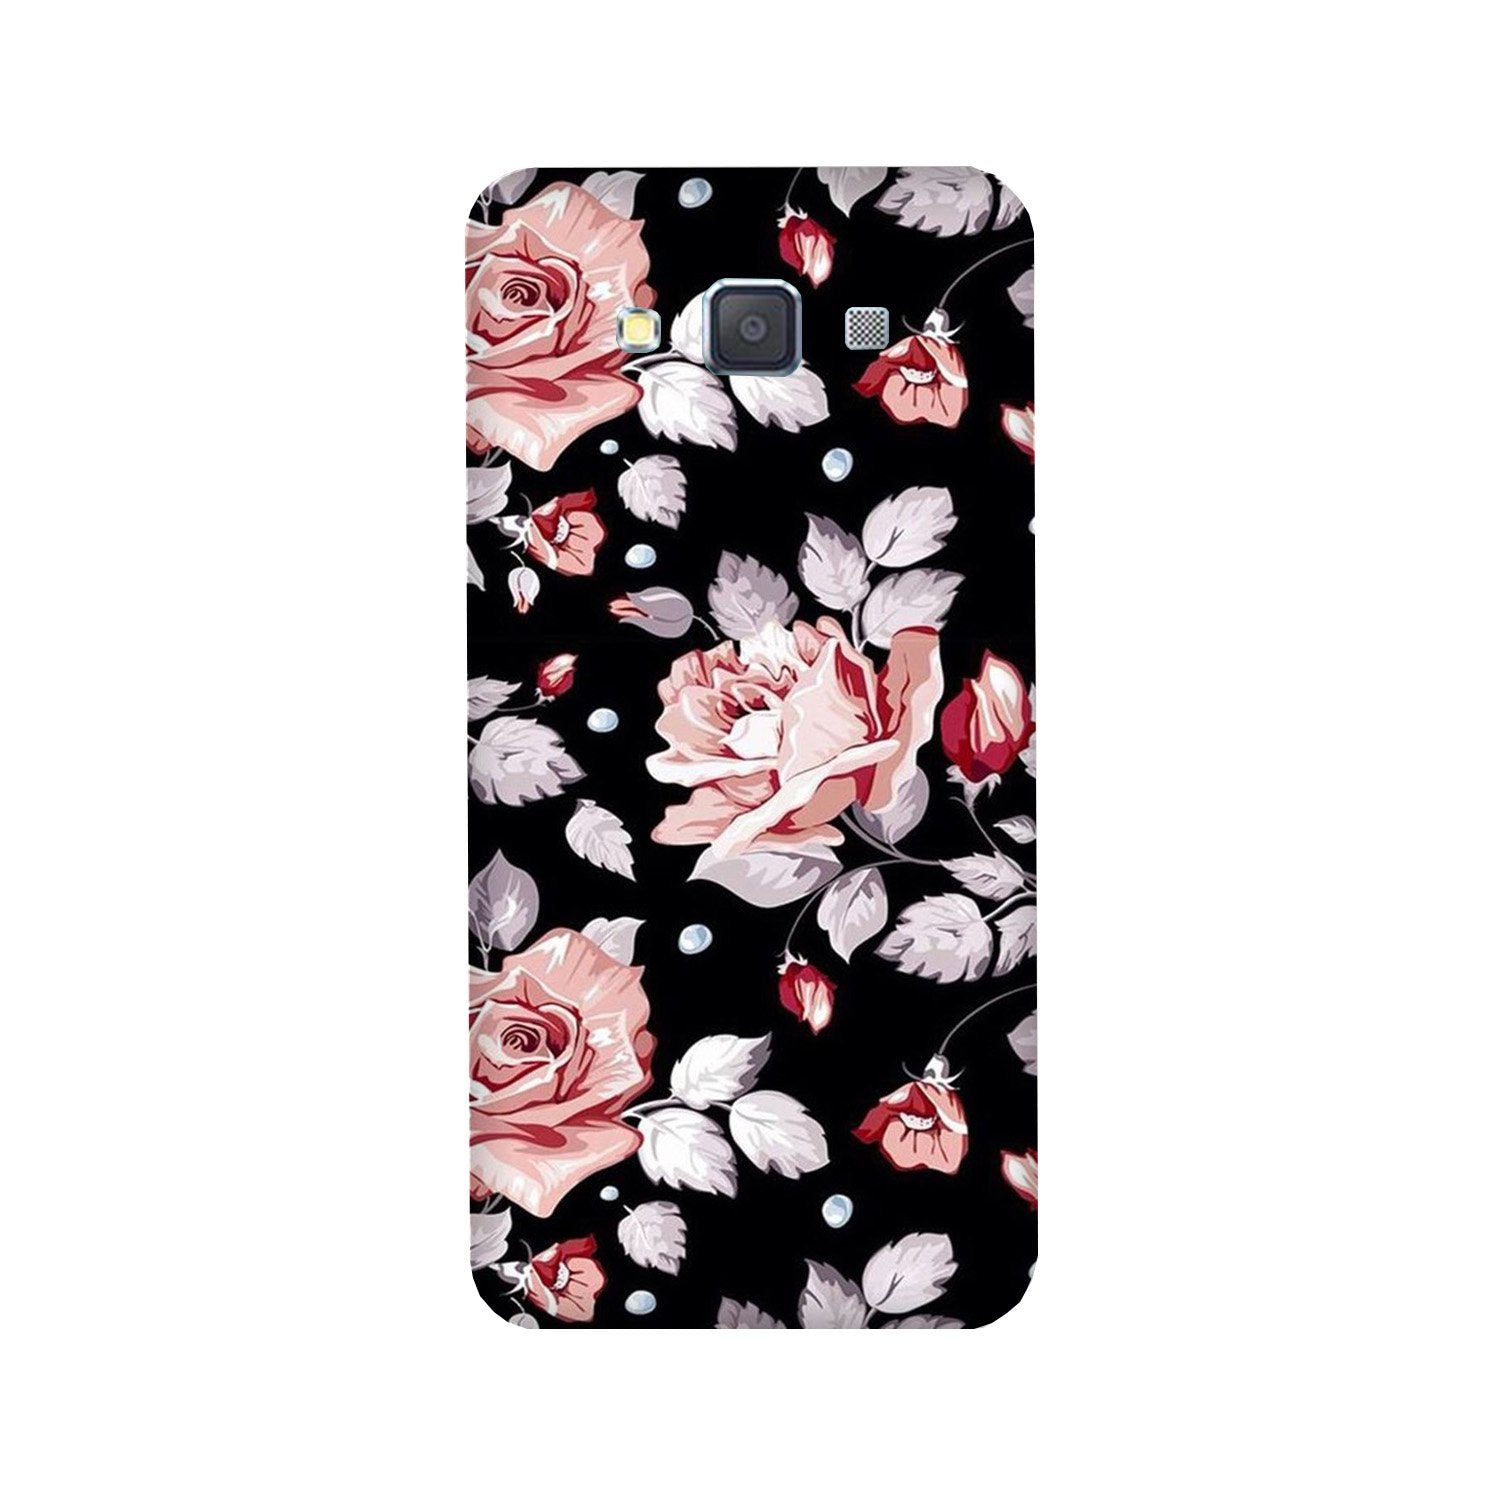 Pink rose Case for Galaxy Grand Prime